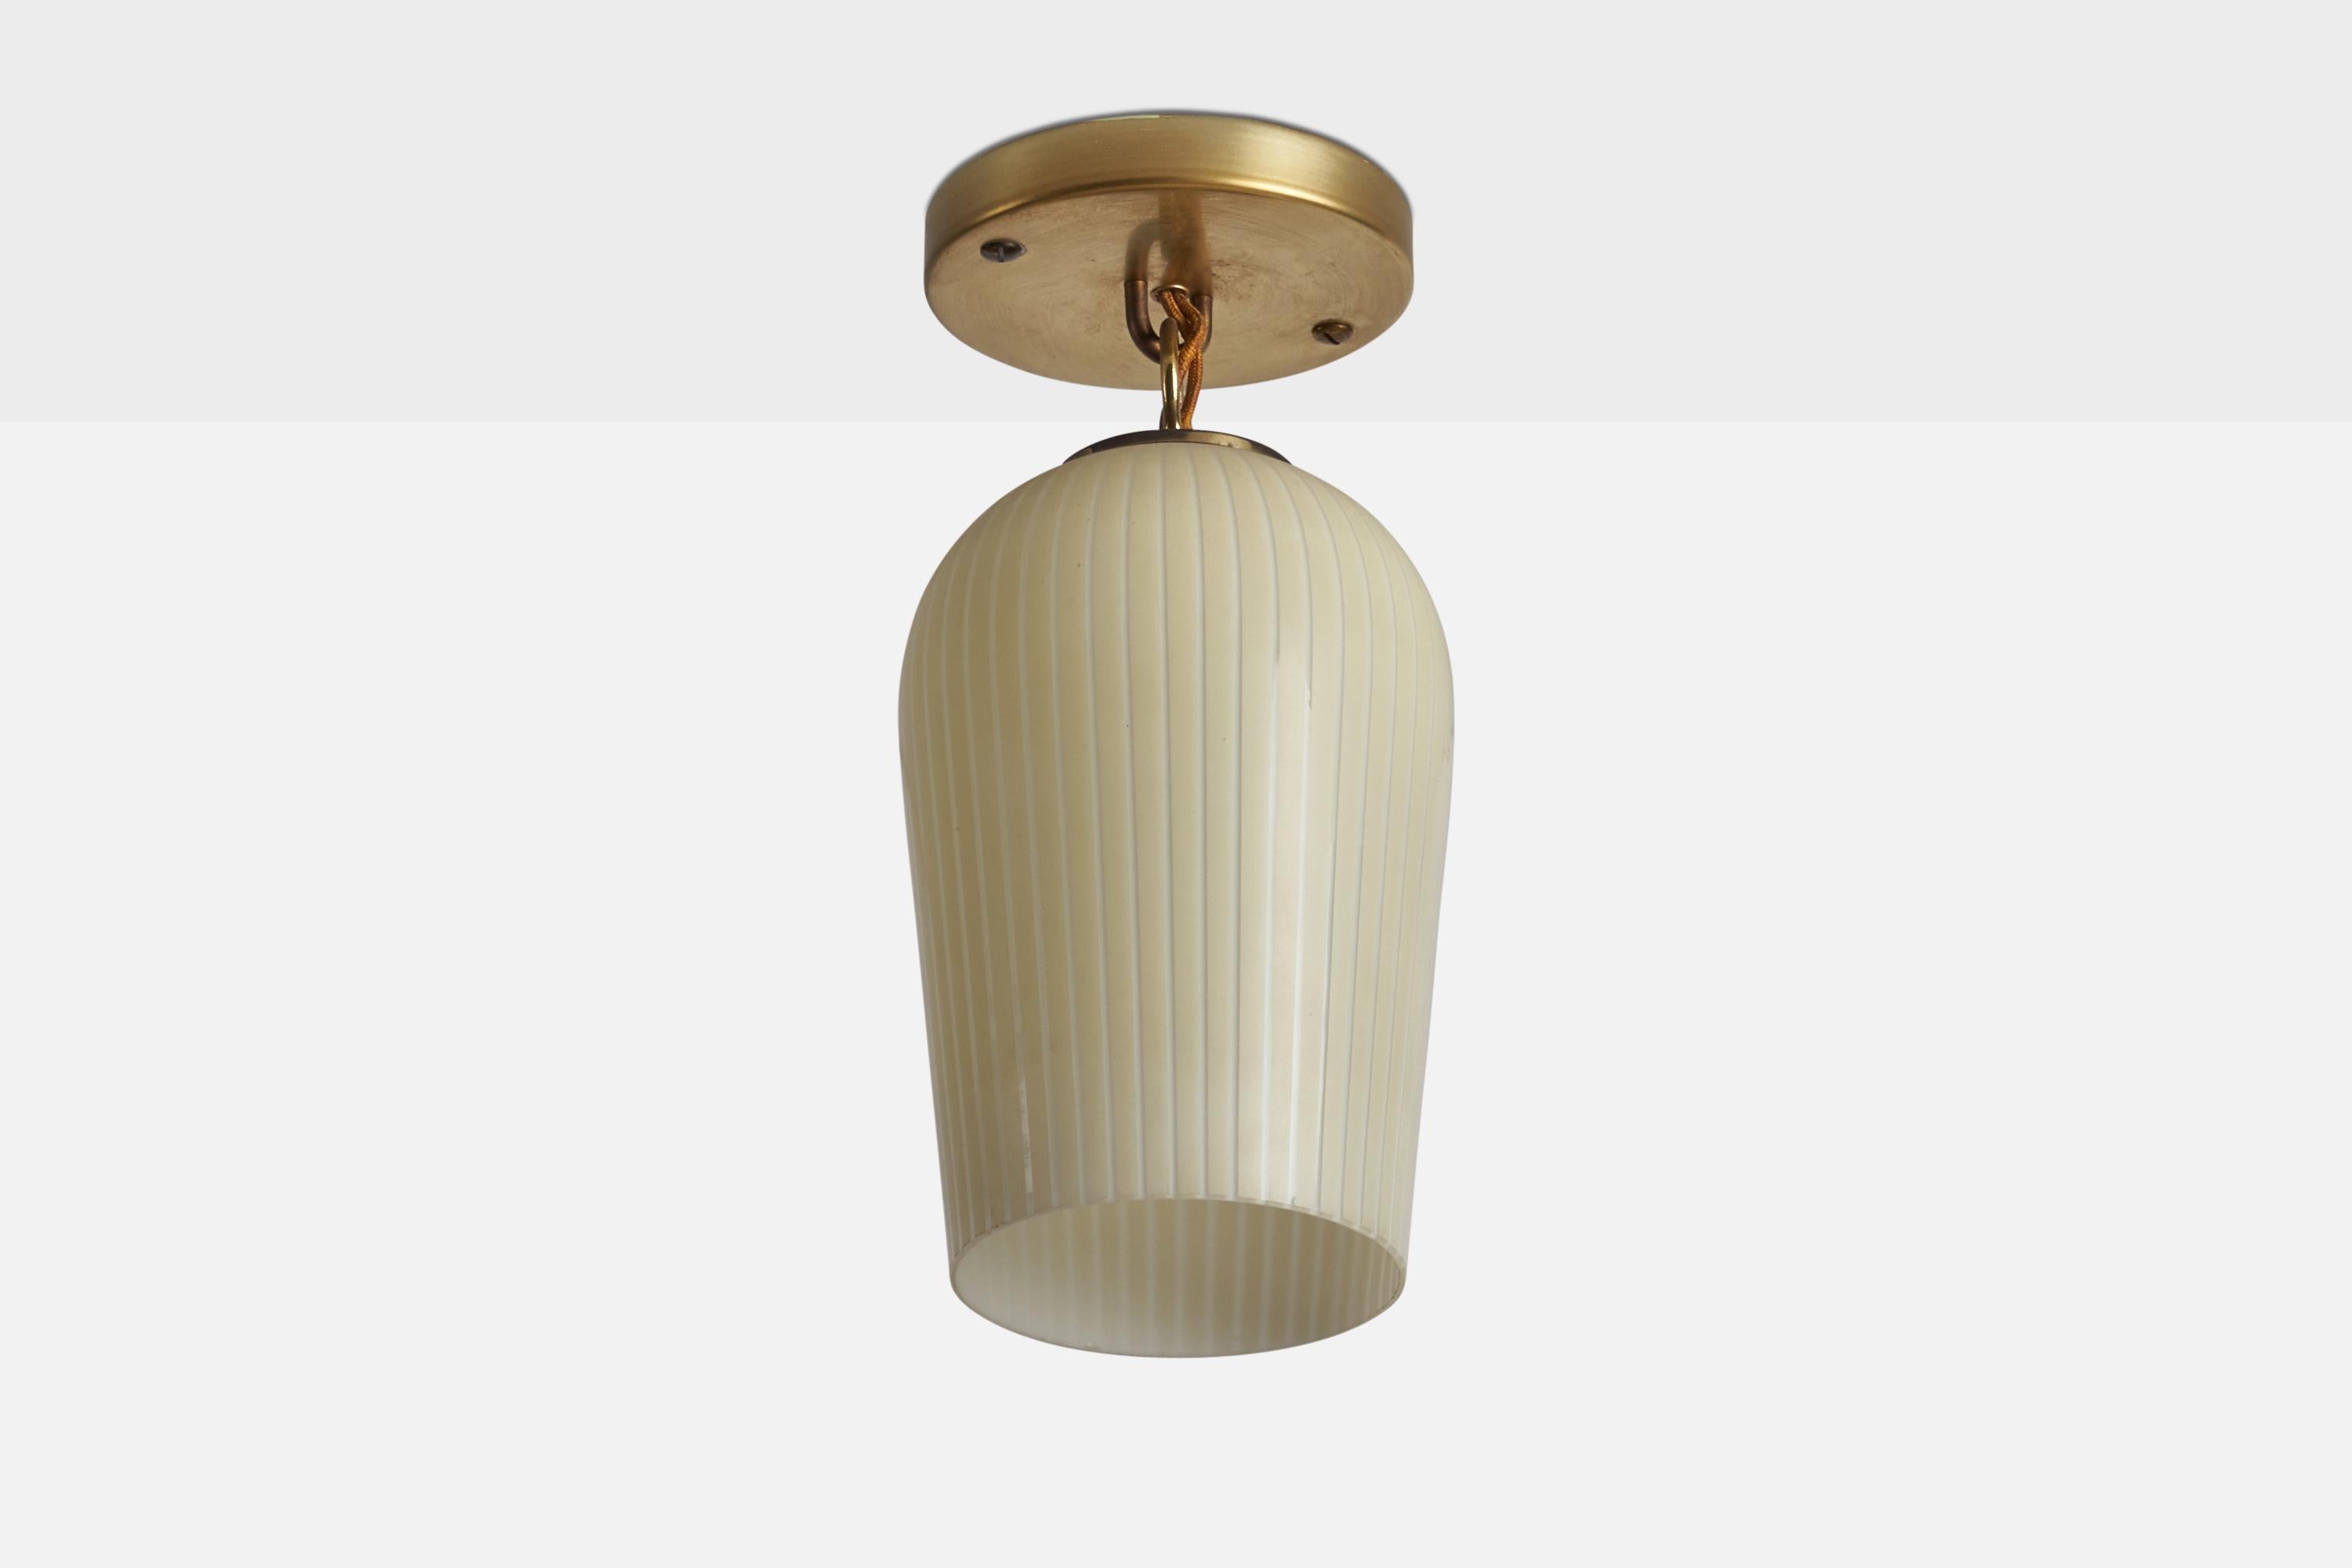 A small pendant light designed and produced by Lightolier, USA, 1960s.

Overall Dimensions (inches): 10” H x 4.5” Diameter
Back Plate Dimensions (inches): 4.5” Diameter
Bulb Specifications: E-26 Bulb
Number of Sockets: 1
All lighting will be